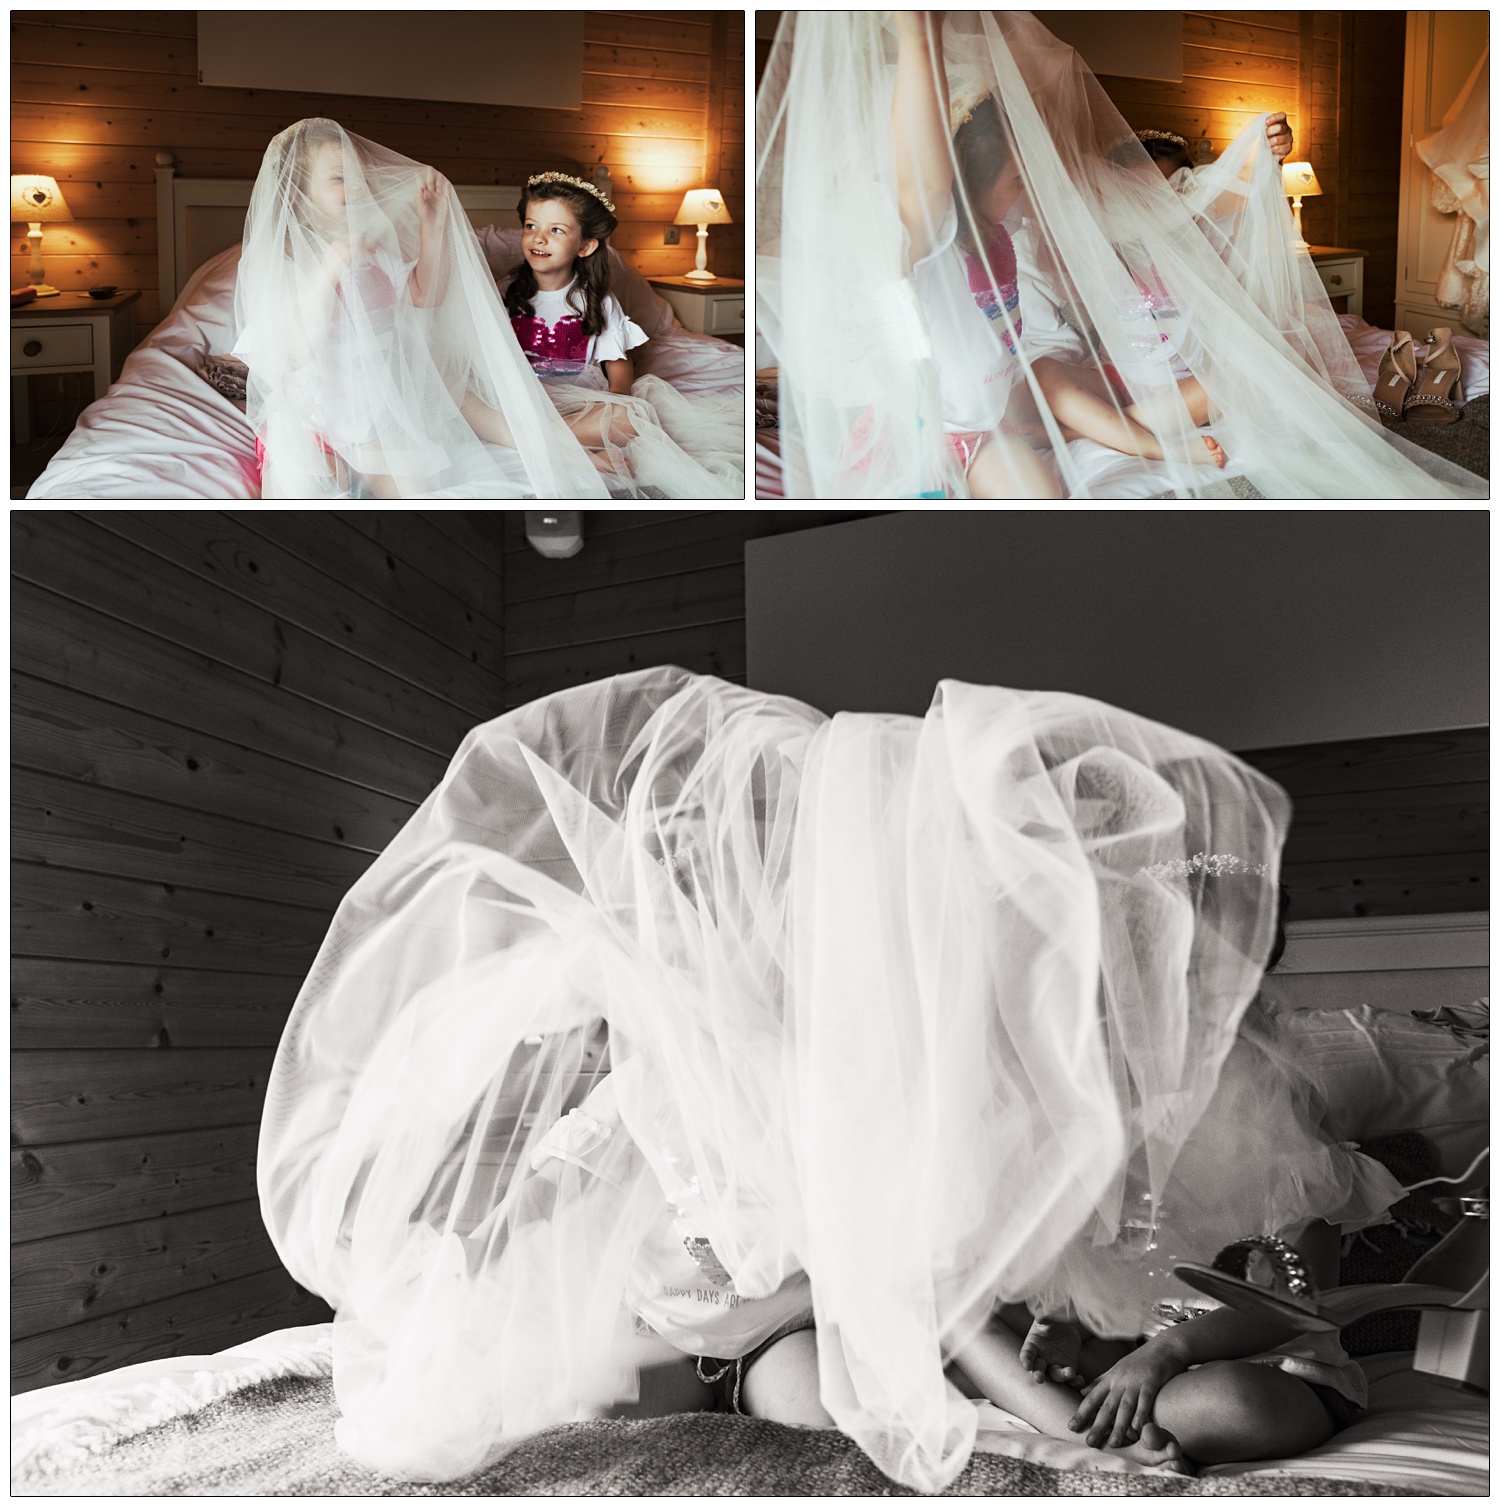 Two children sitting on a bed are playing with a bridal veil. Hiding underneath it.